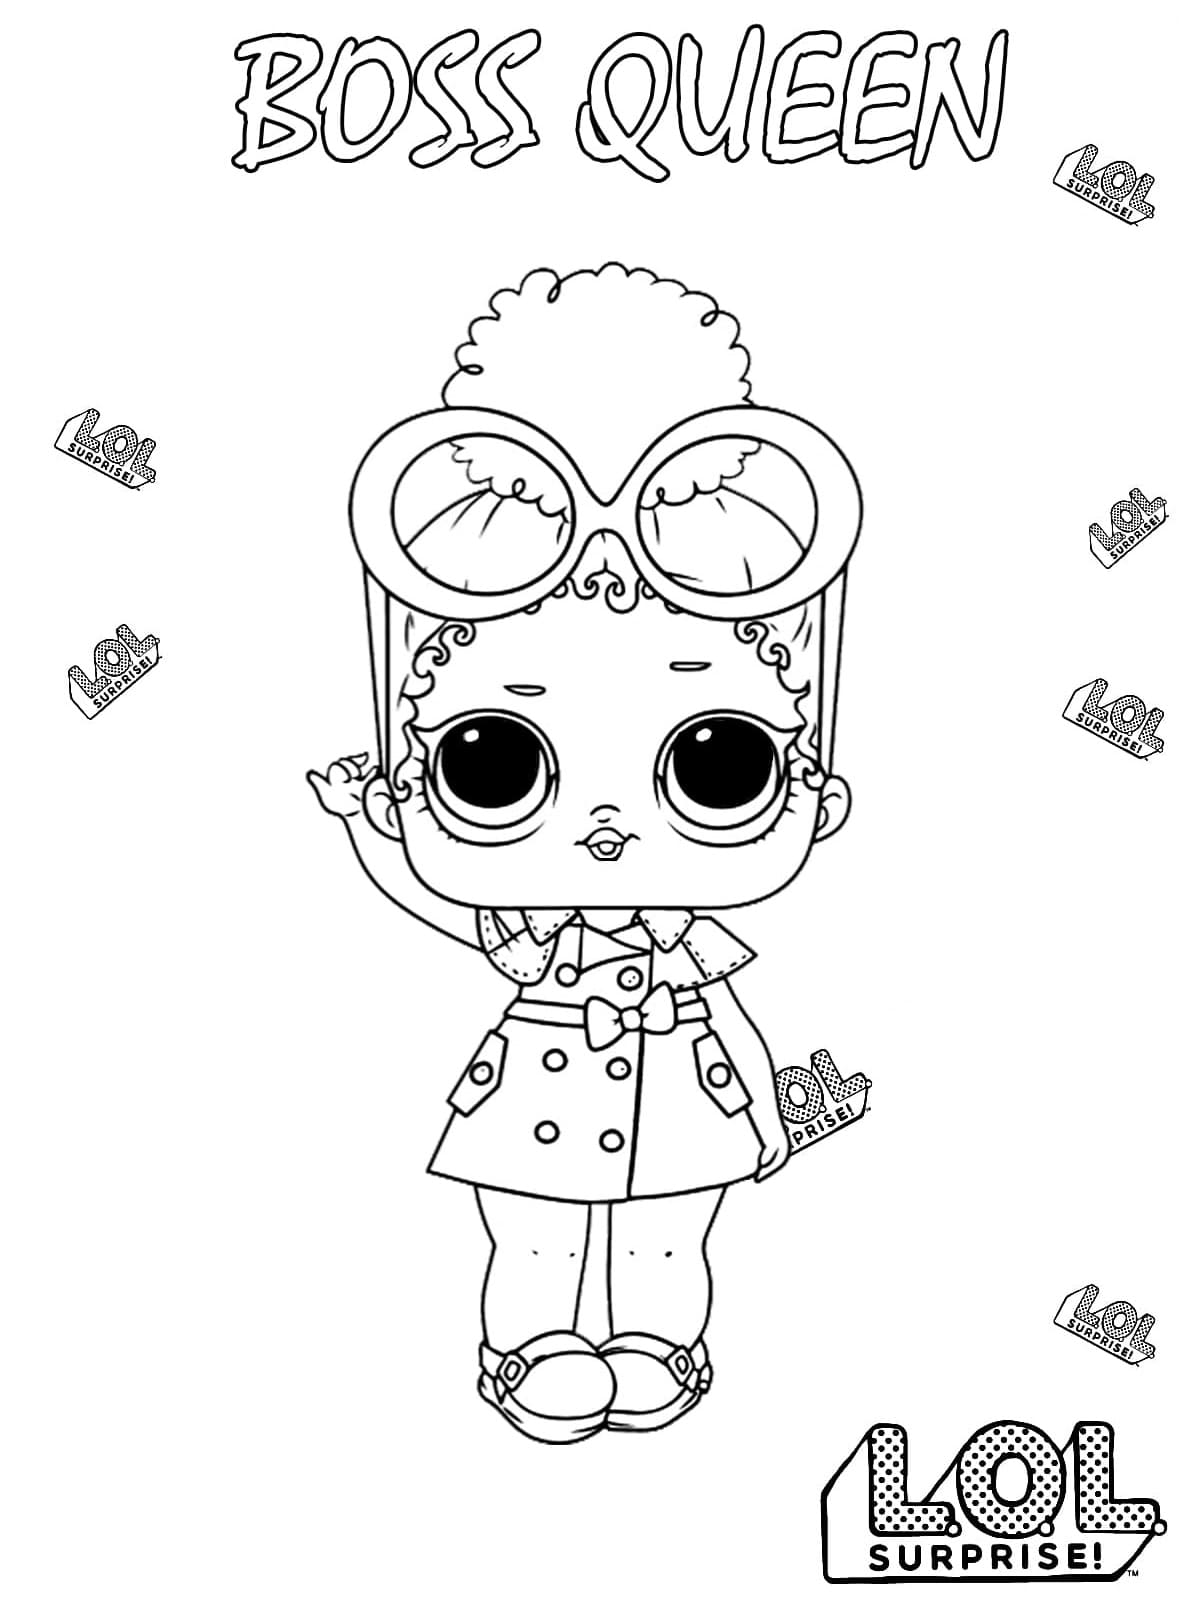 Boss Queen LOL coloring page